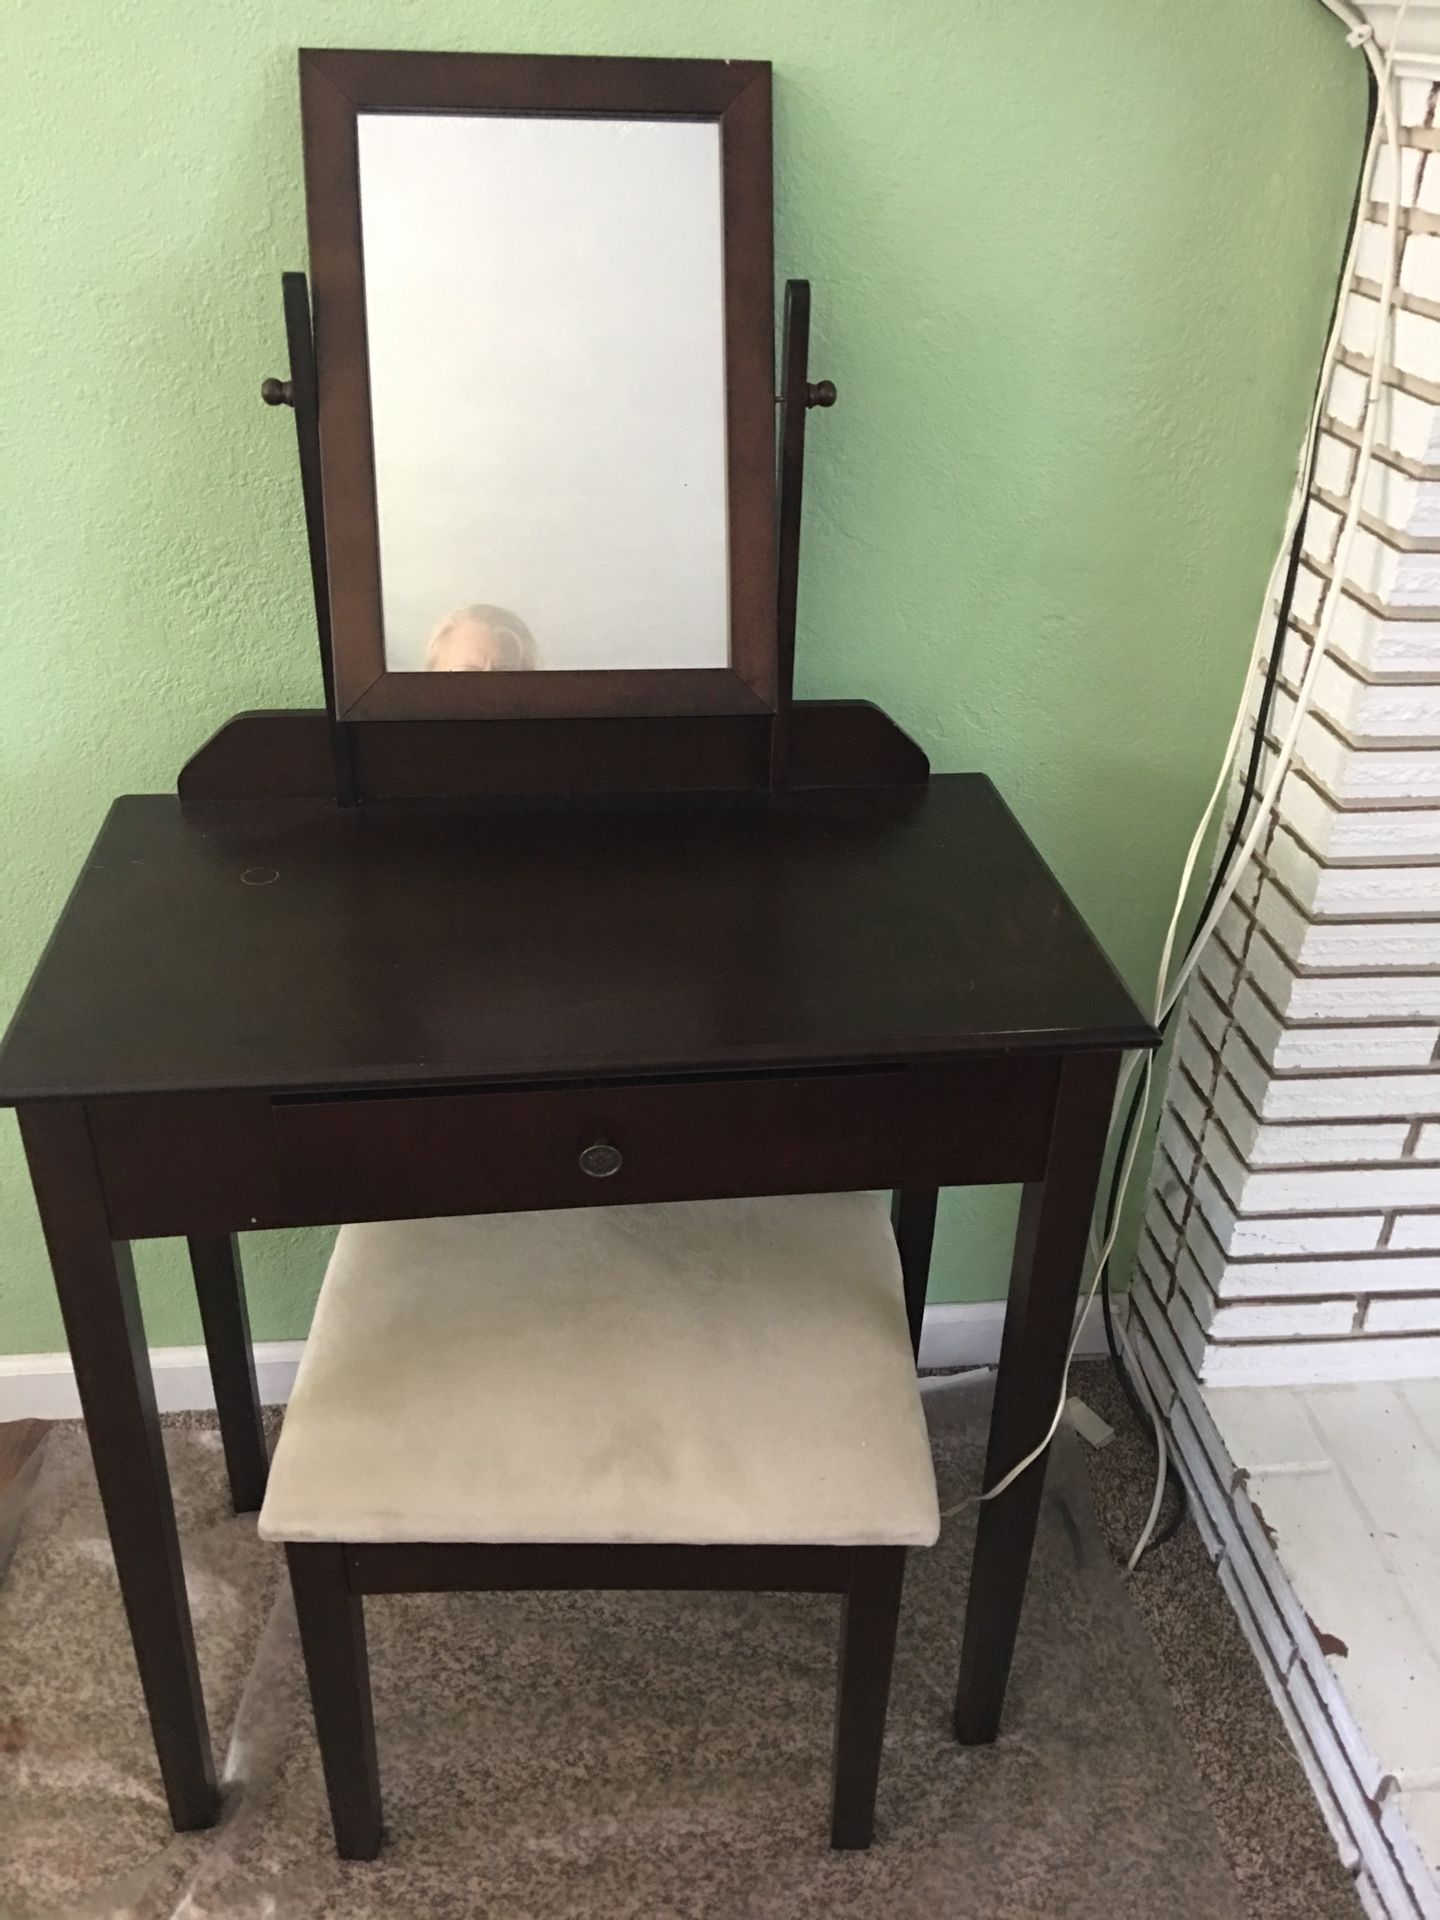 Antique desk with mirror and bench